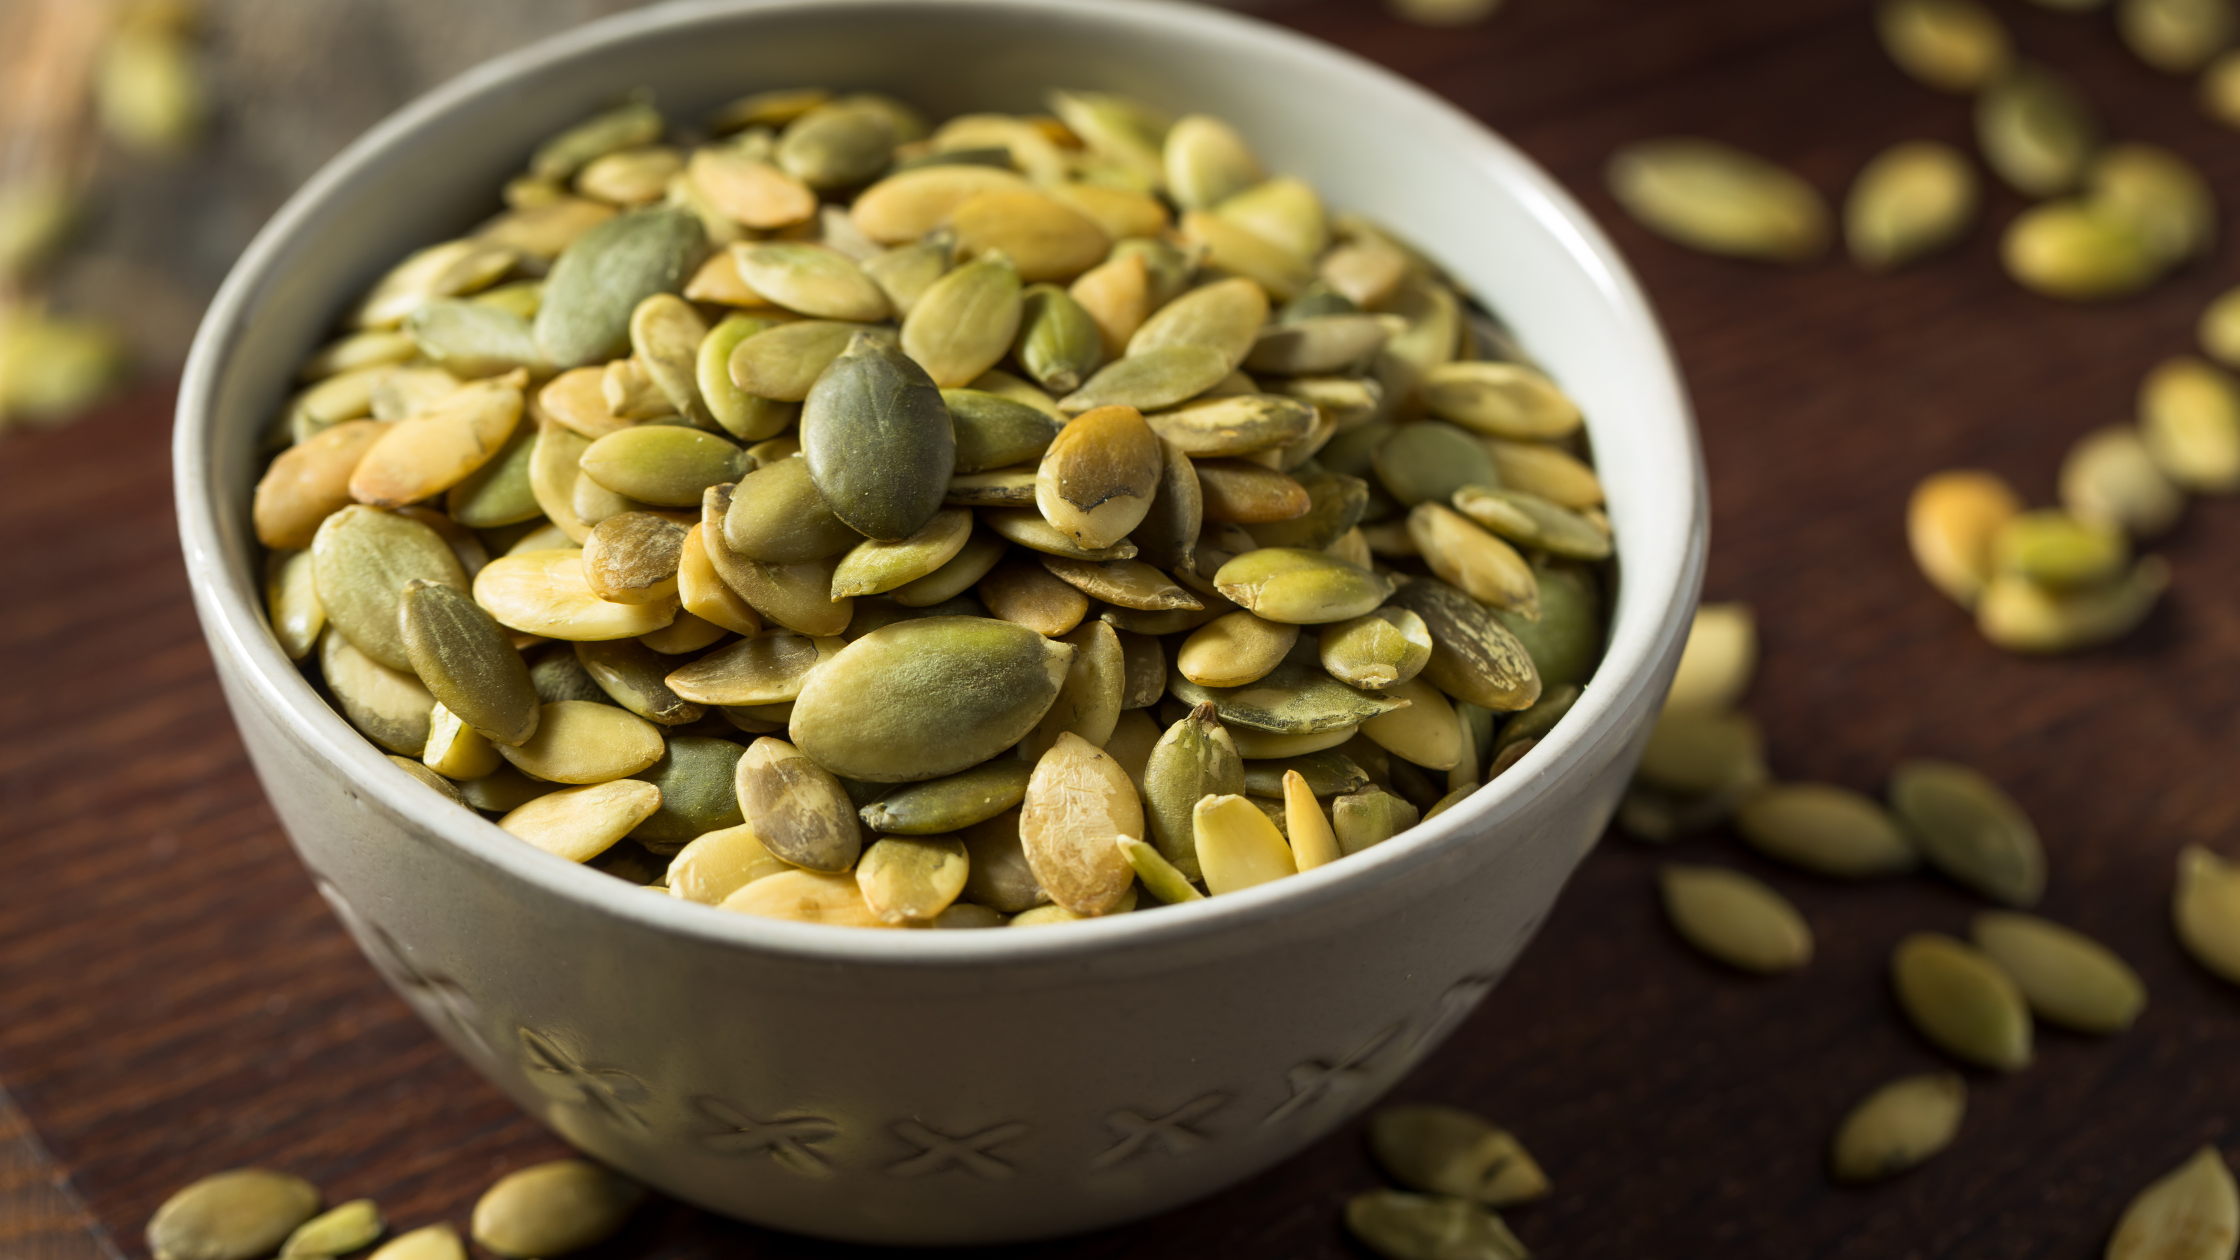 The Life-Changing Health Benefits of Pumpkin Seeds